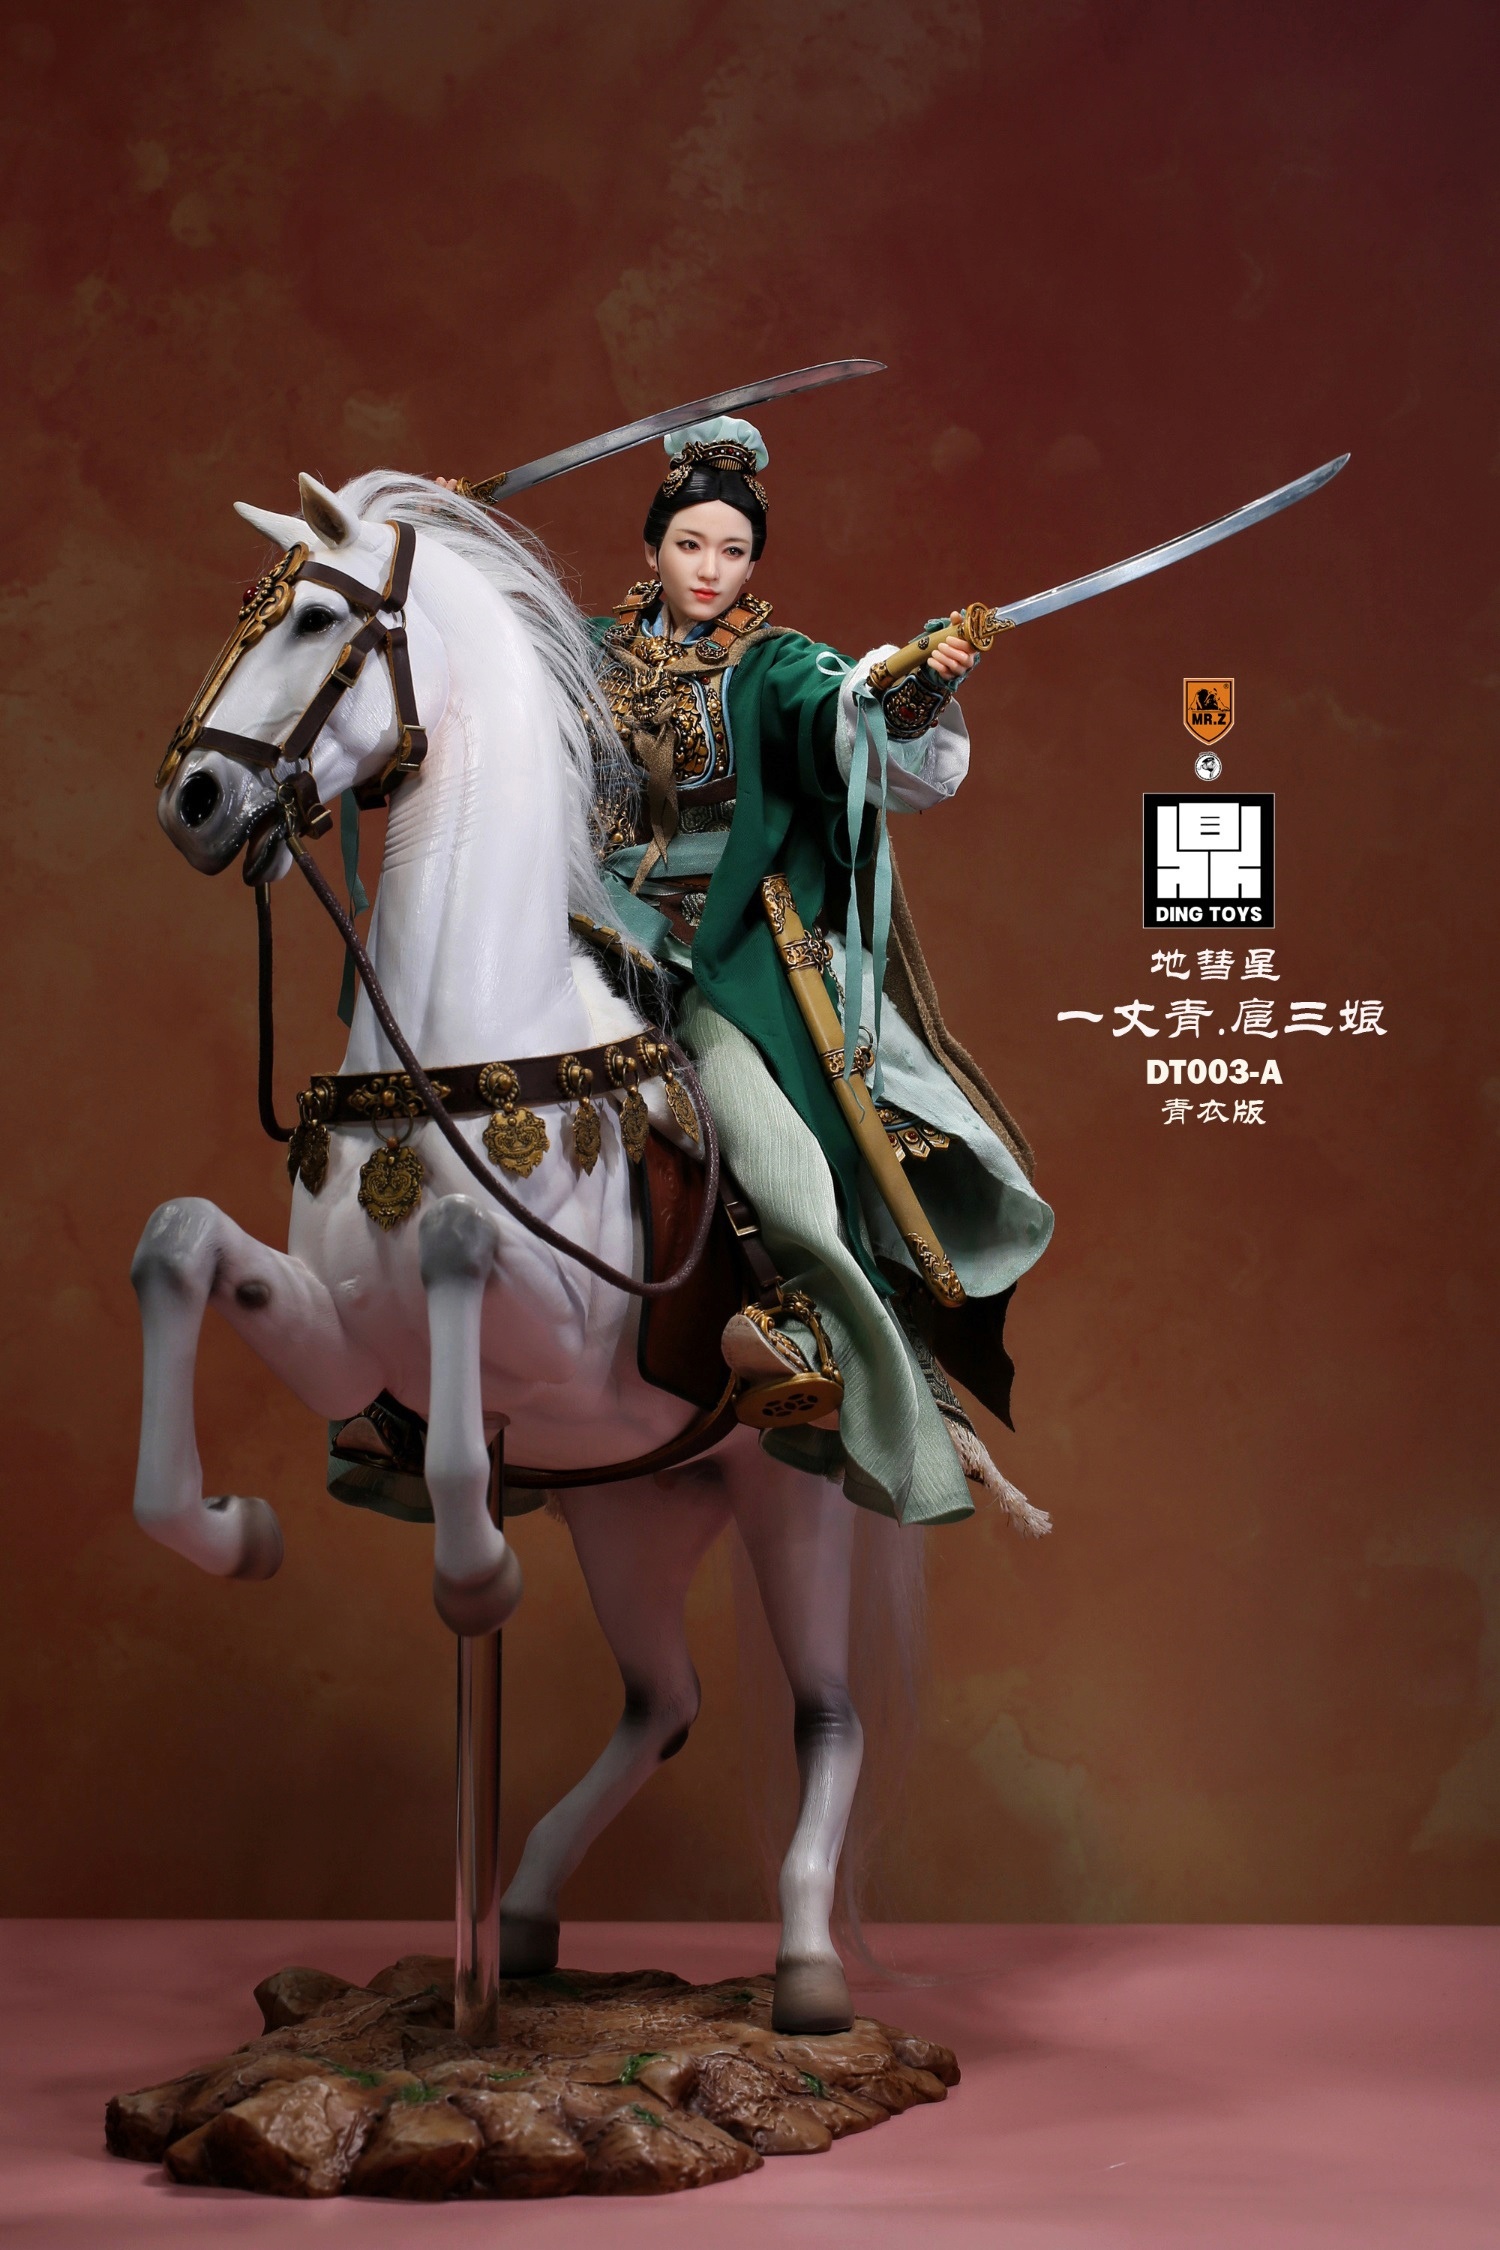 MrZ - NEW PRODUCT: Mr.Z x Ding Toys DT003 1/6 Scale 《Water Margin》Shiying Zhang (Green and Red versions), Horse (White) 12228